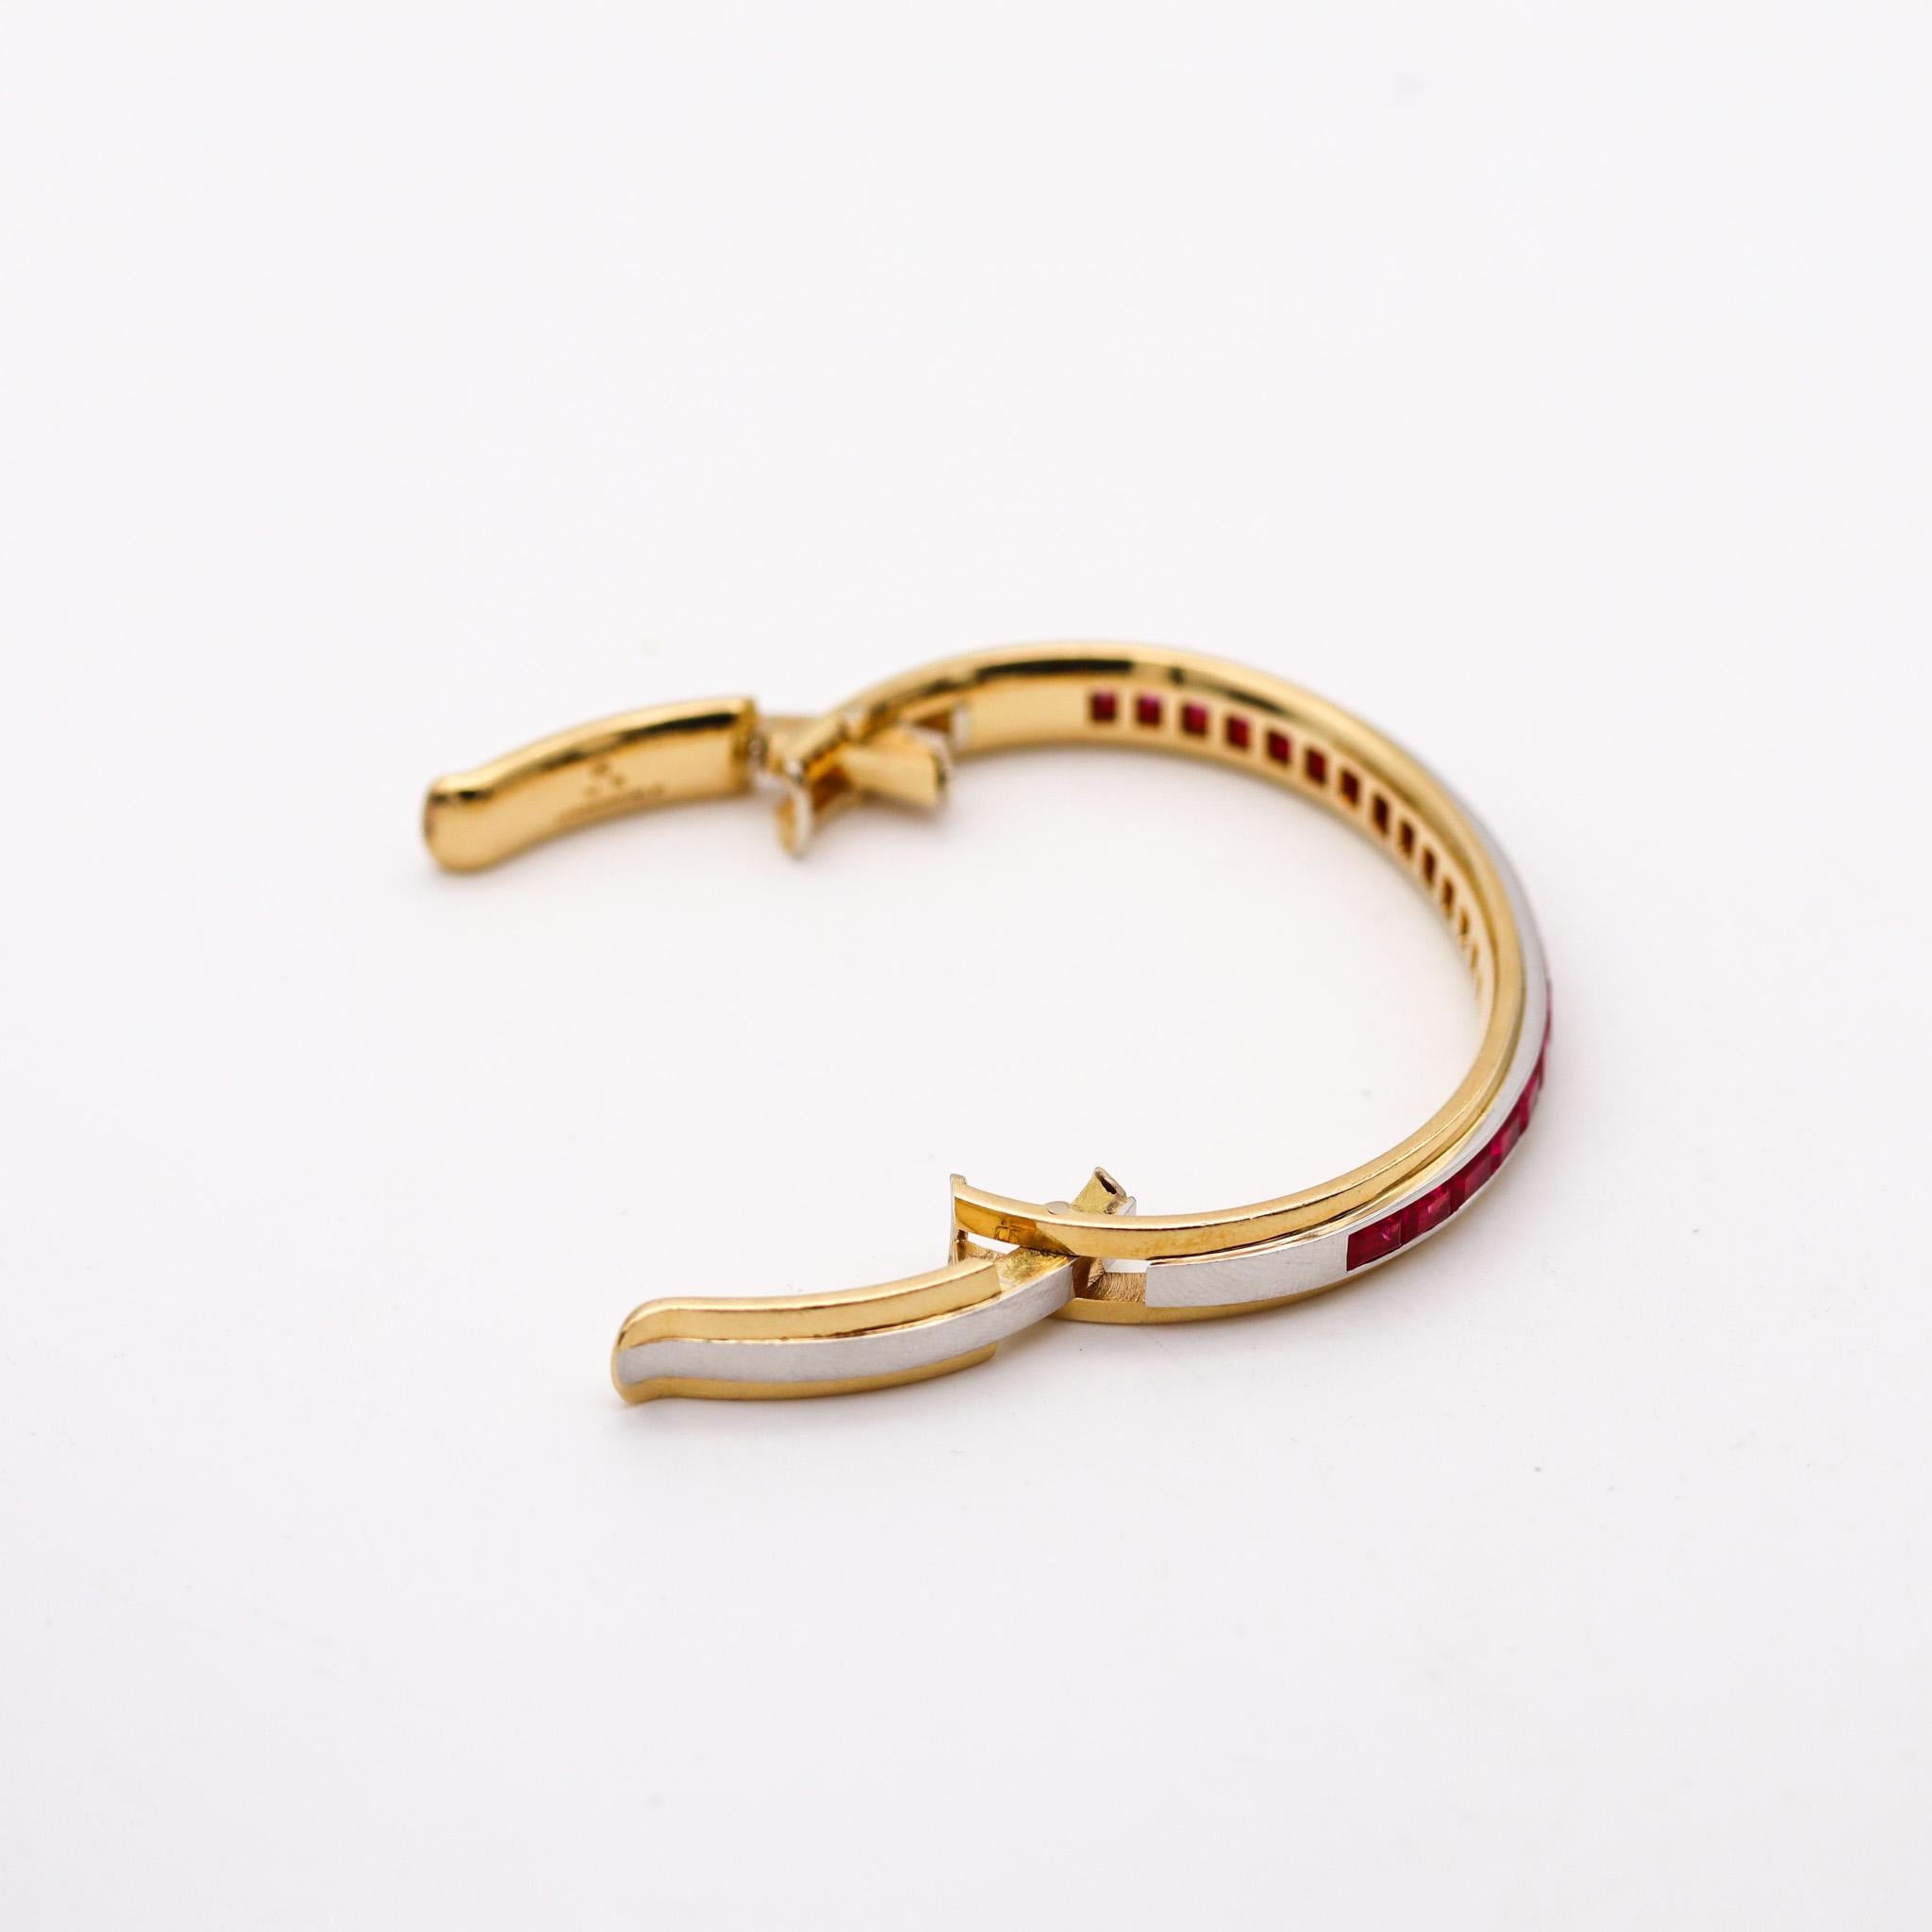 Square Cut Hemmerle Bangle Bracelet In 18Kt Gold And Platinum With 22.65 Ctw Red Rubies For Sale